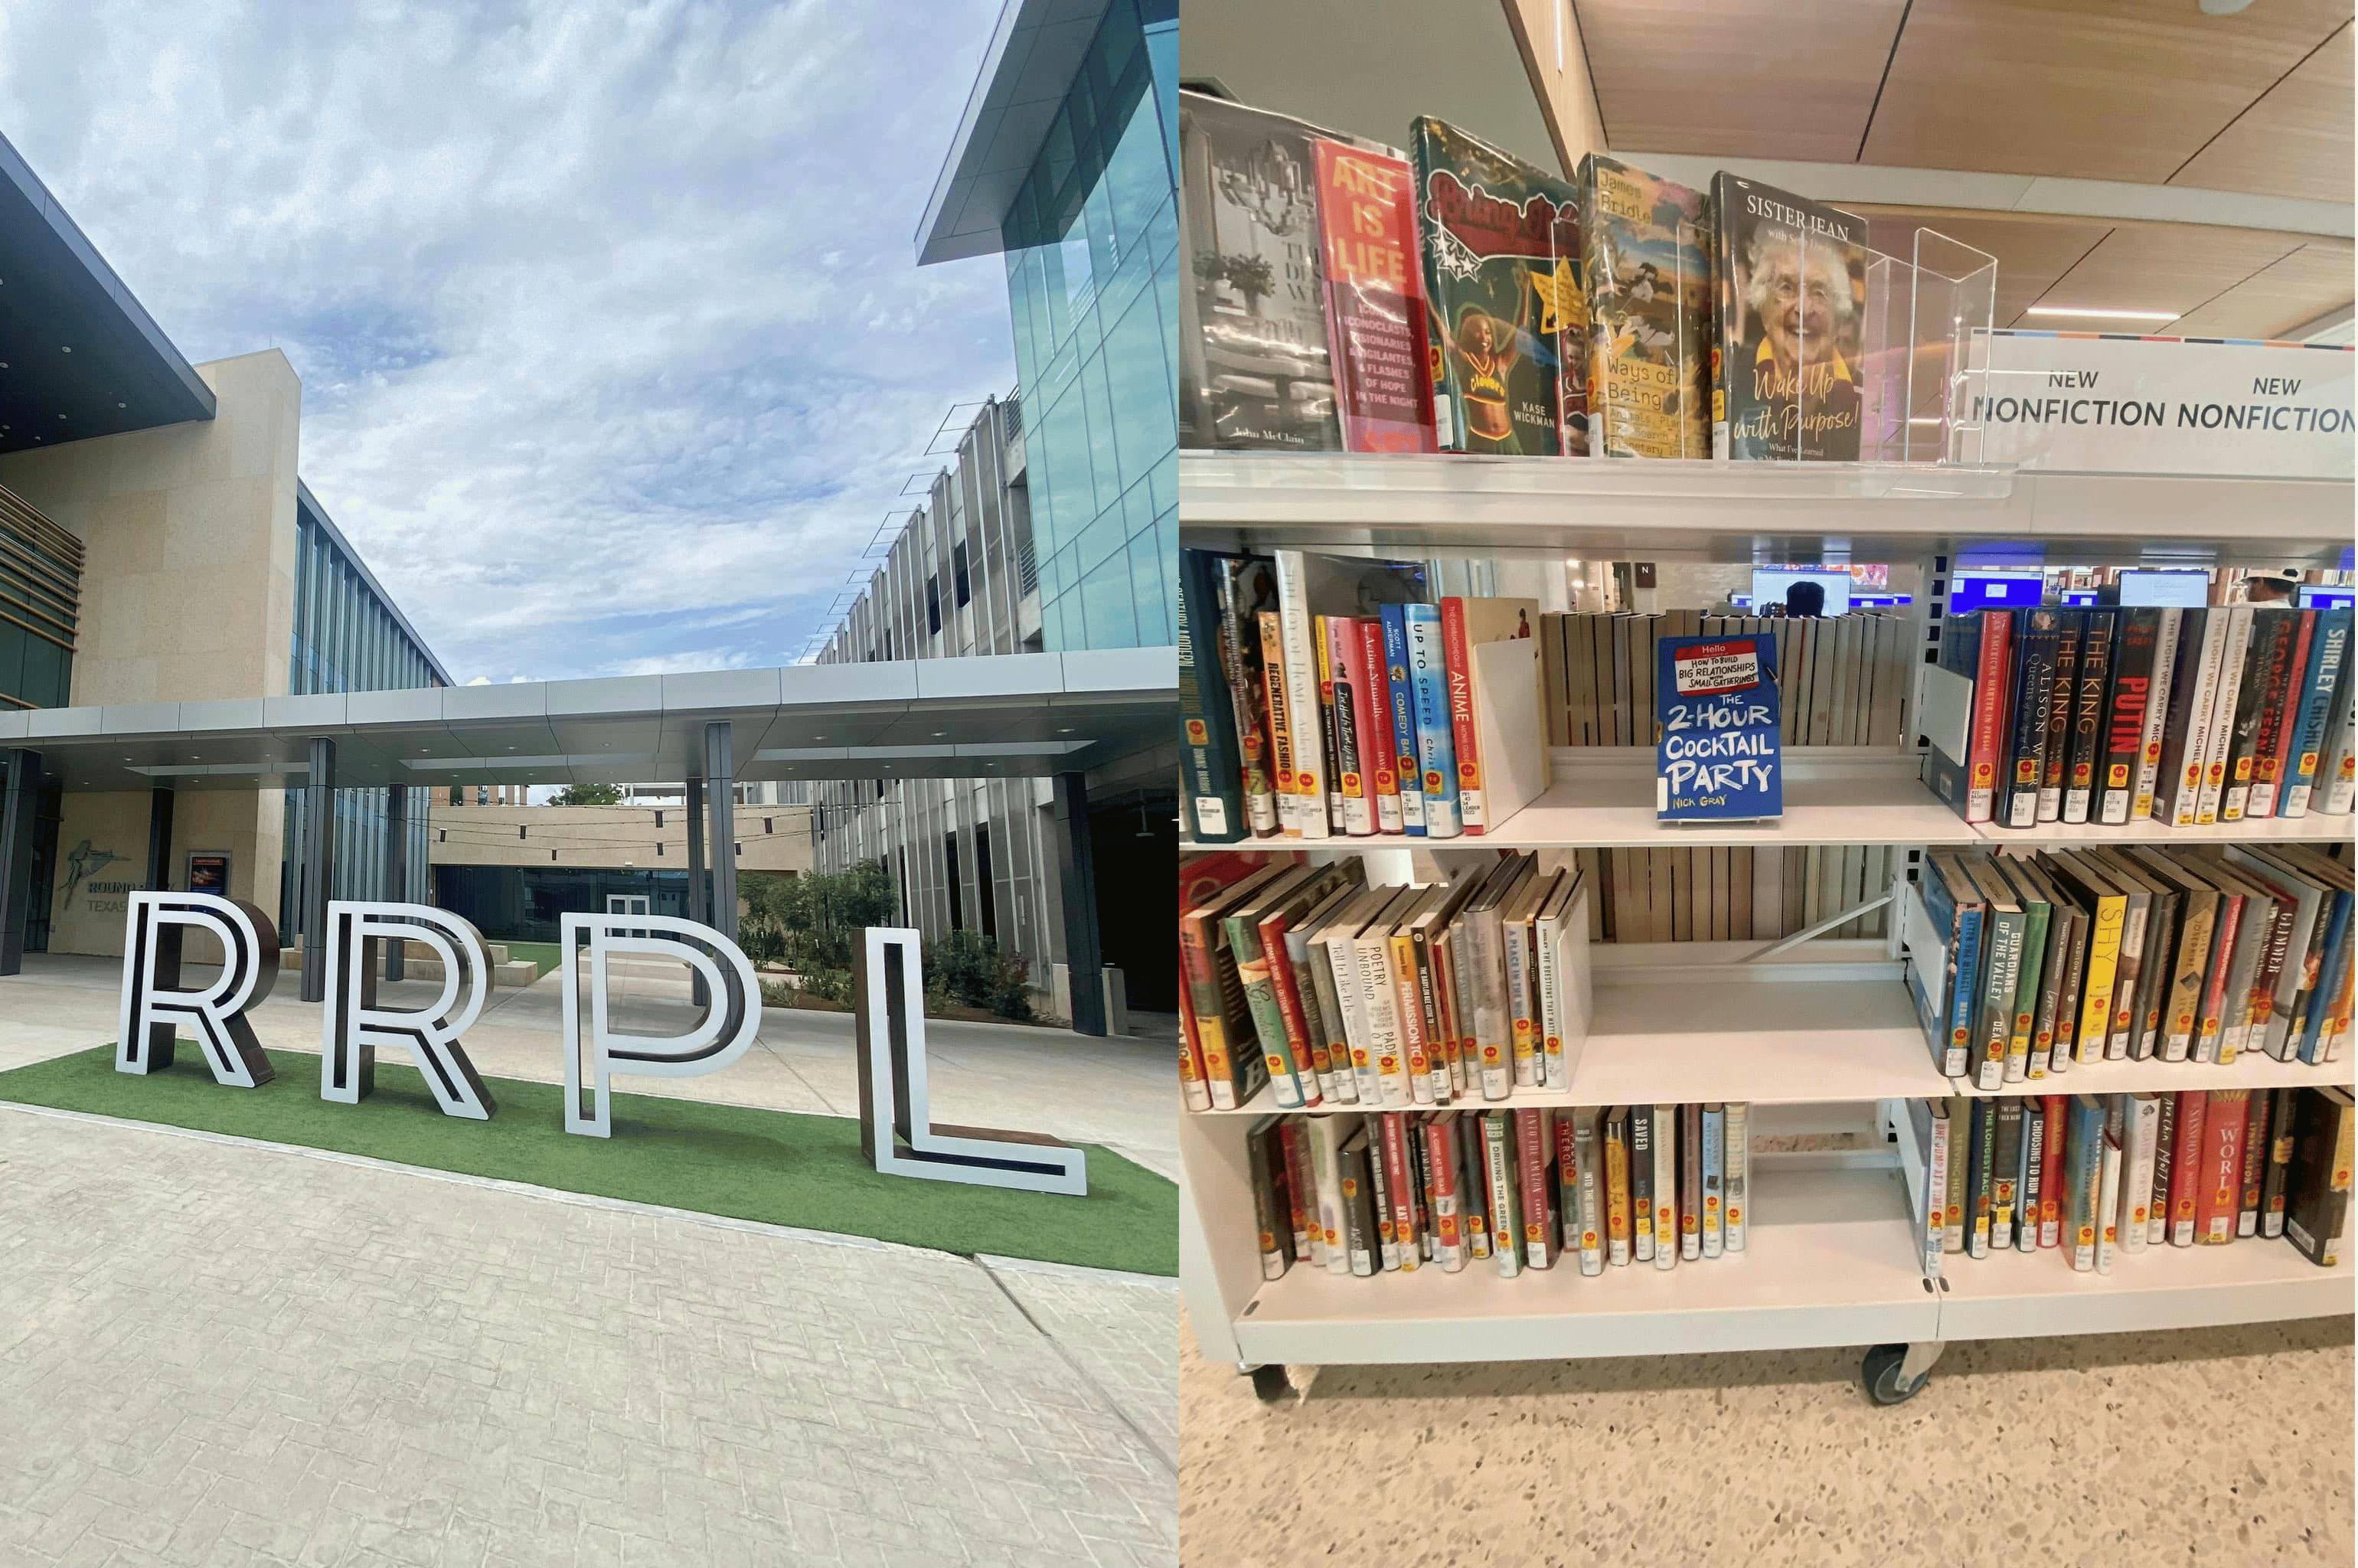 A two collage photo of RRPL library on the left and a photo of The 2-Hour Cocktail Party in a library shelf on the right